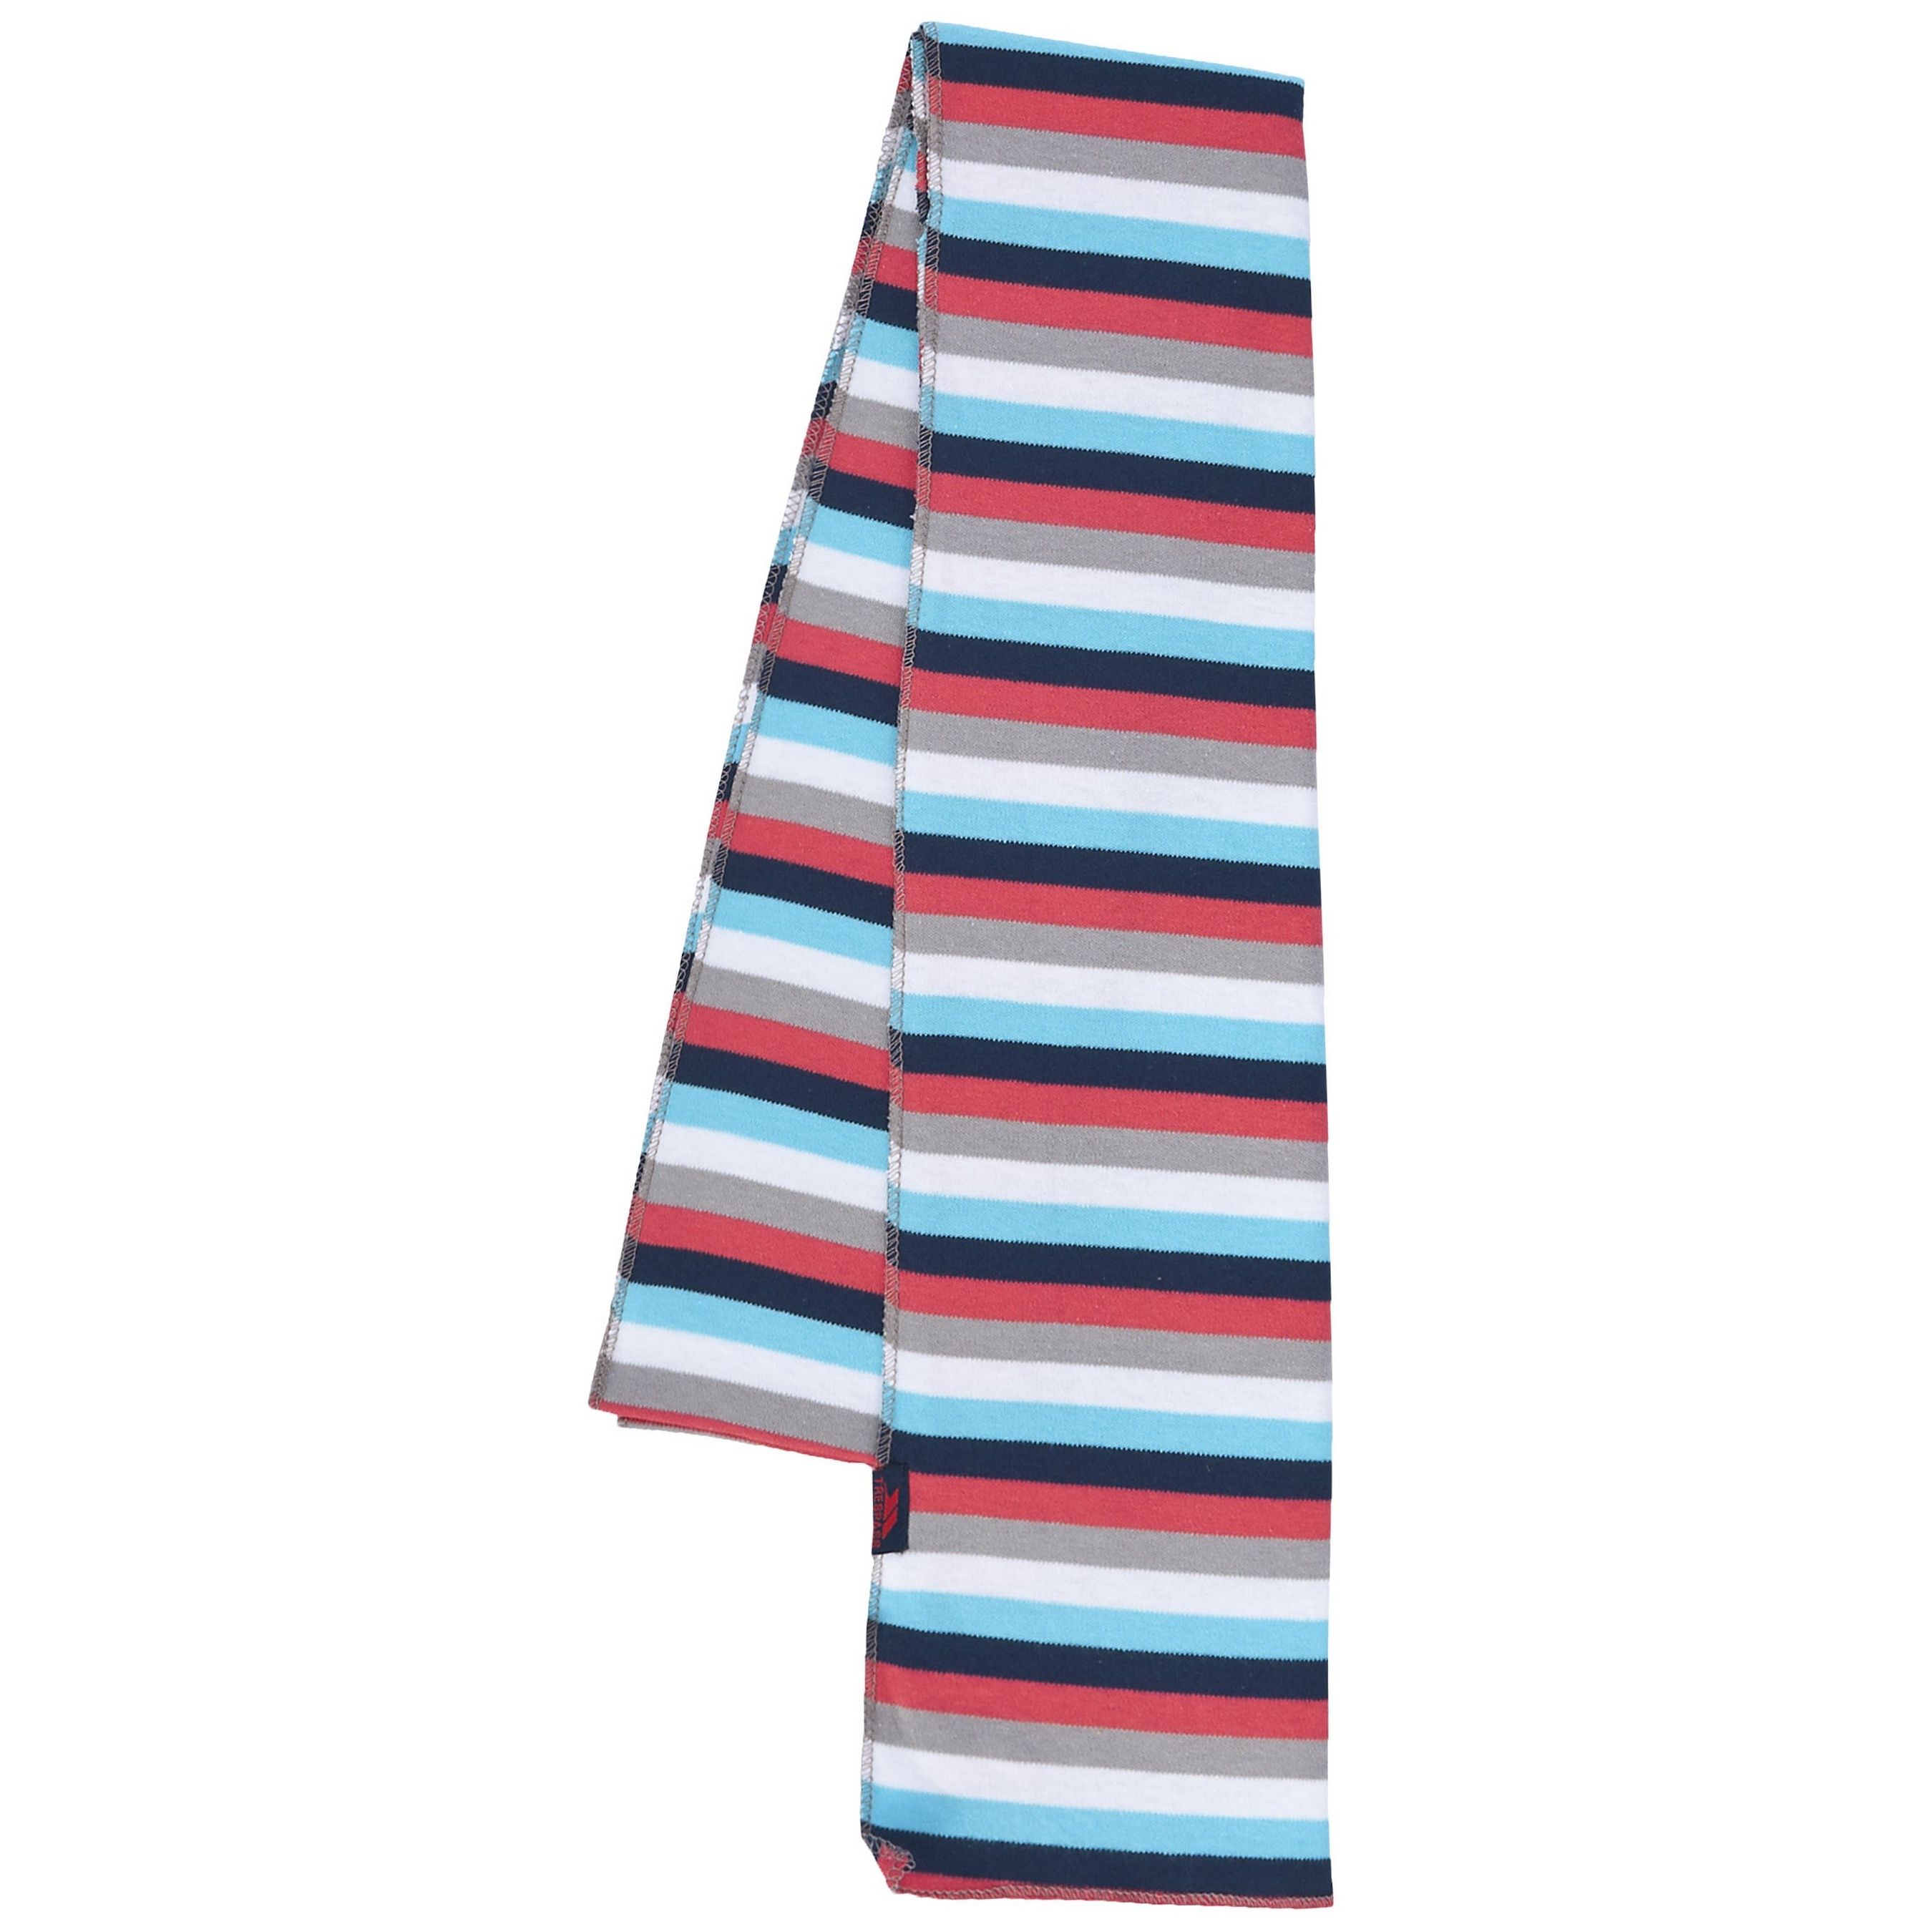 Womens winter scarf. Striped design. Jersey material. Fabric: 100% cotton. Machine washable.